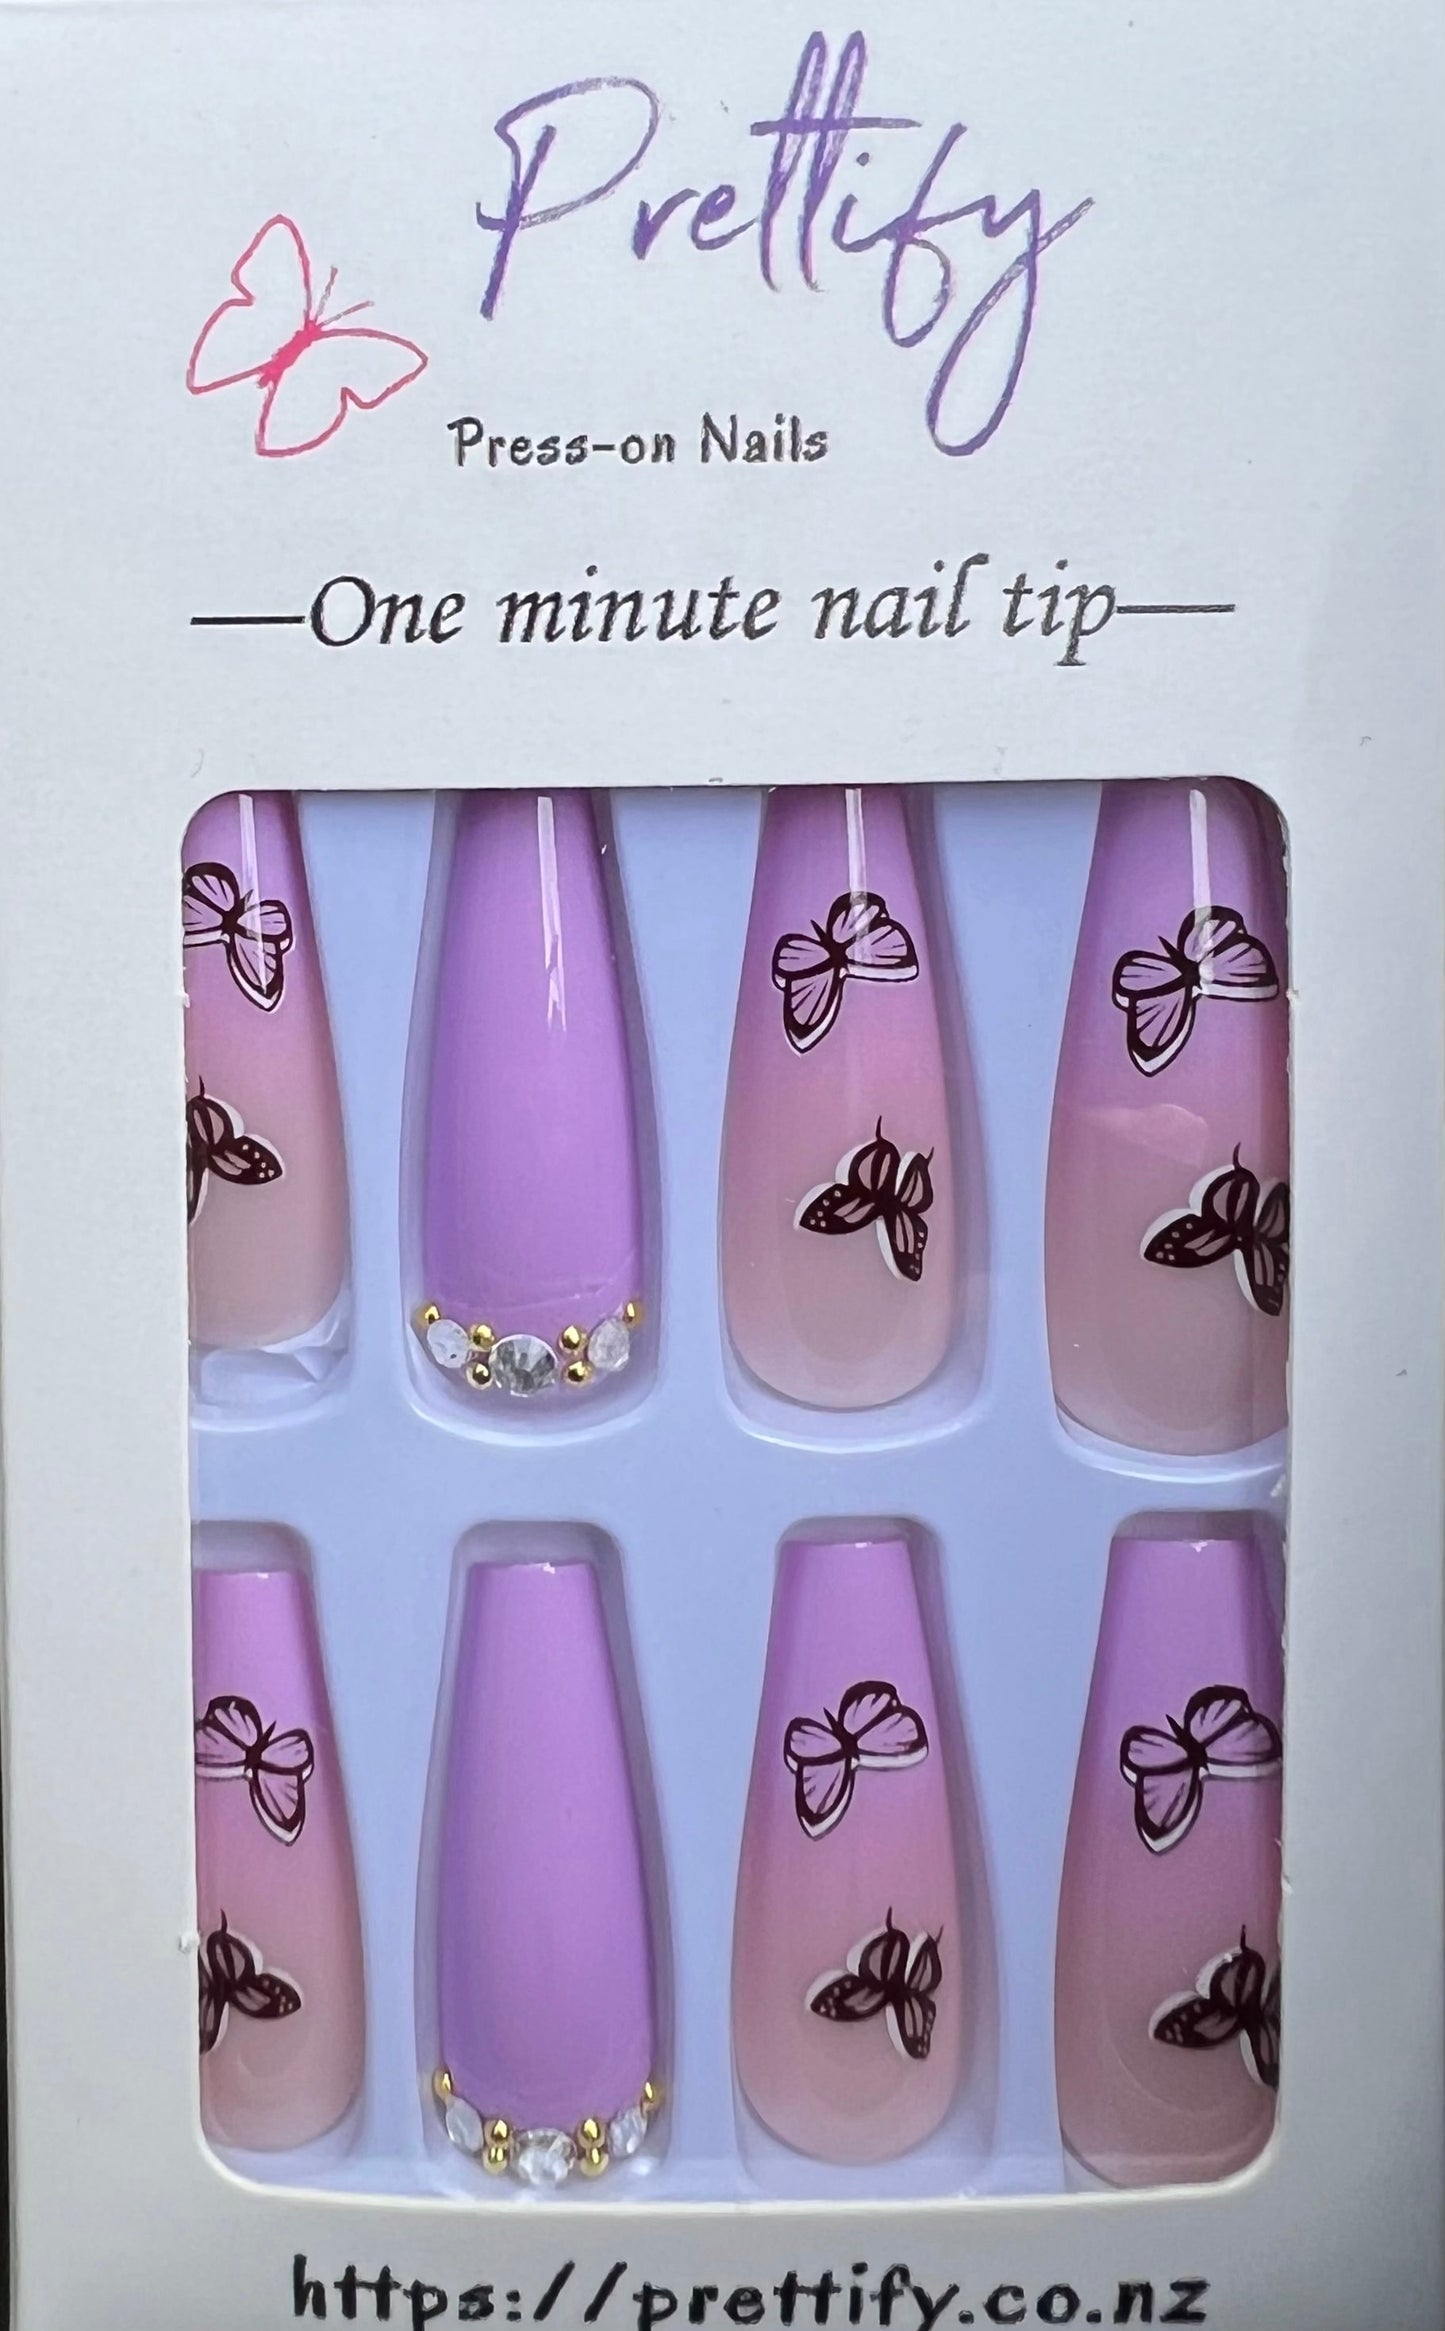 Pink with Butterflies & Jewels - Coffin Press on Nails #415